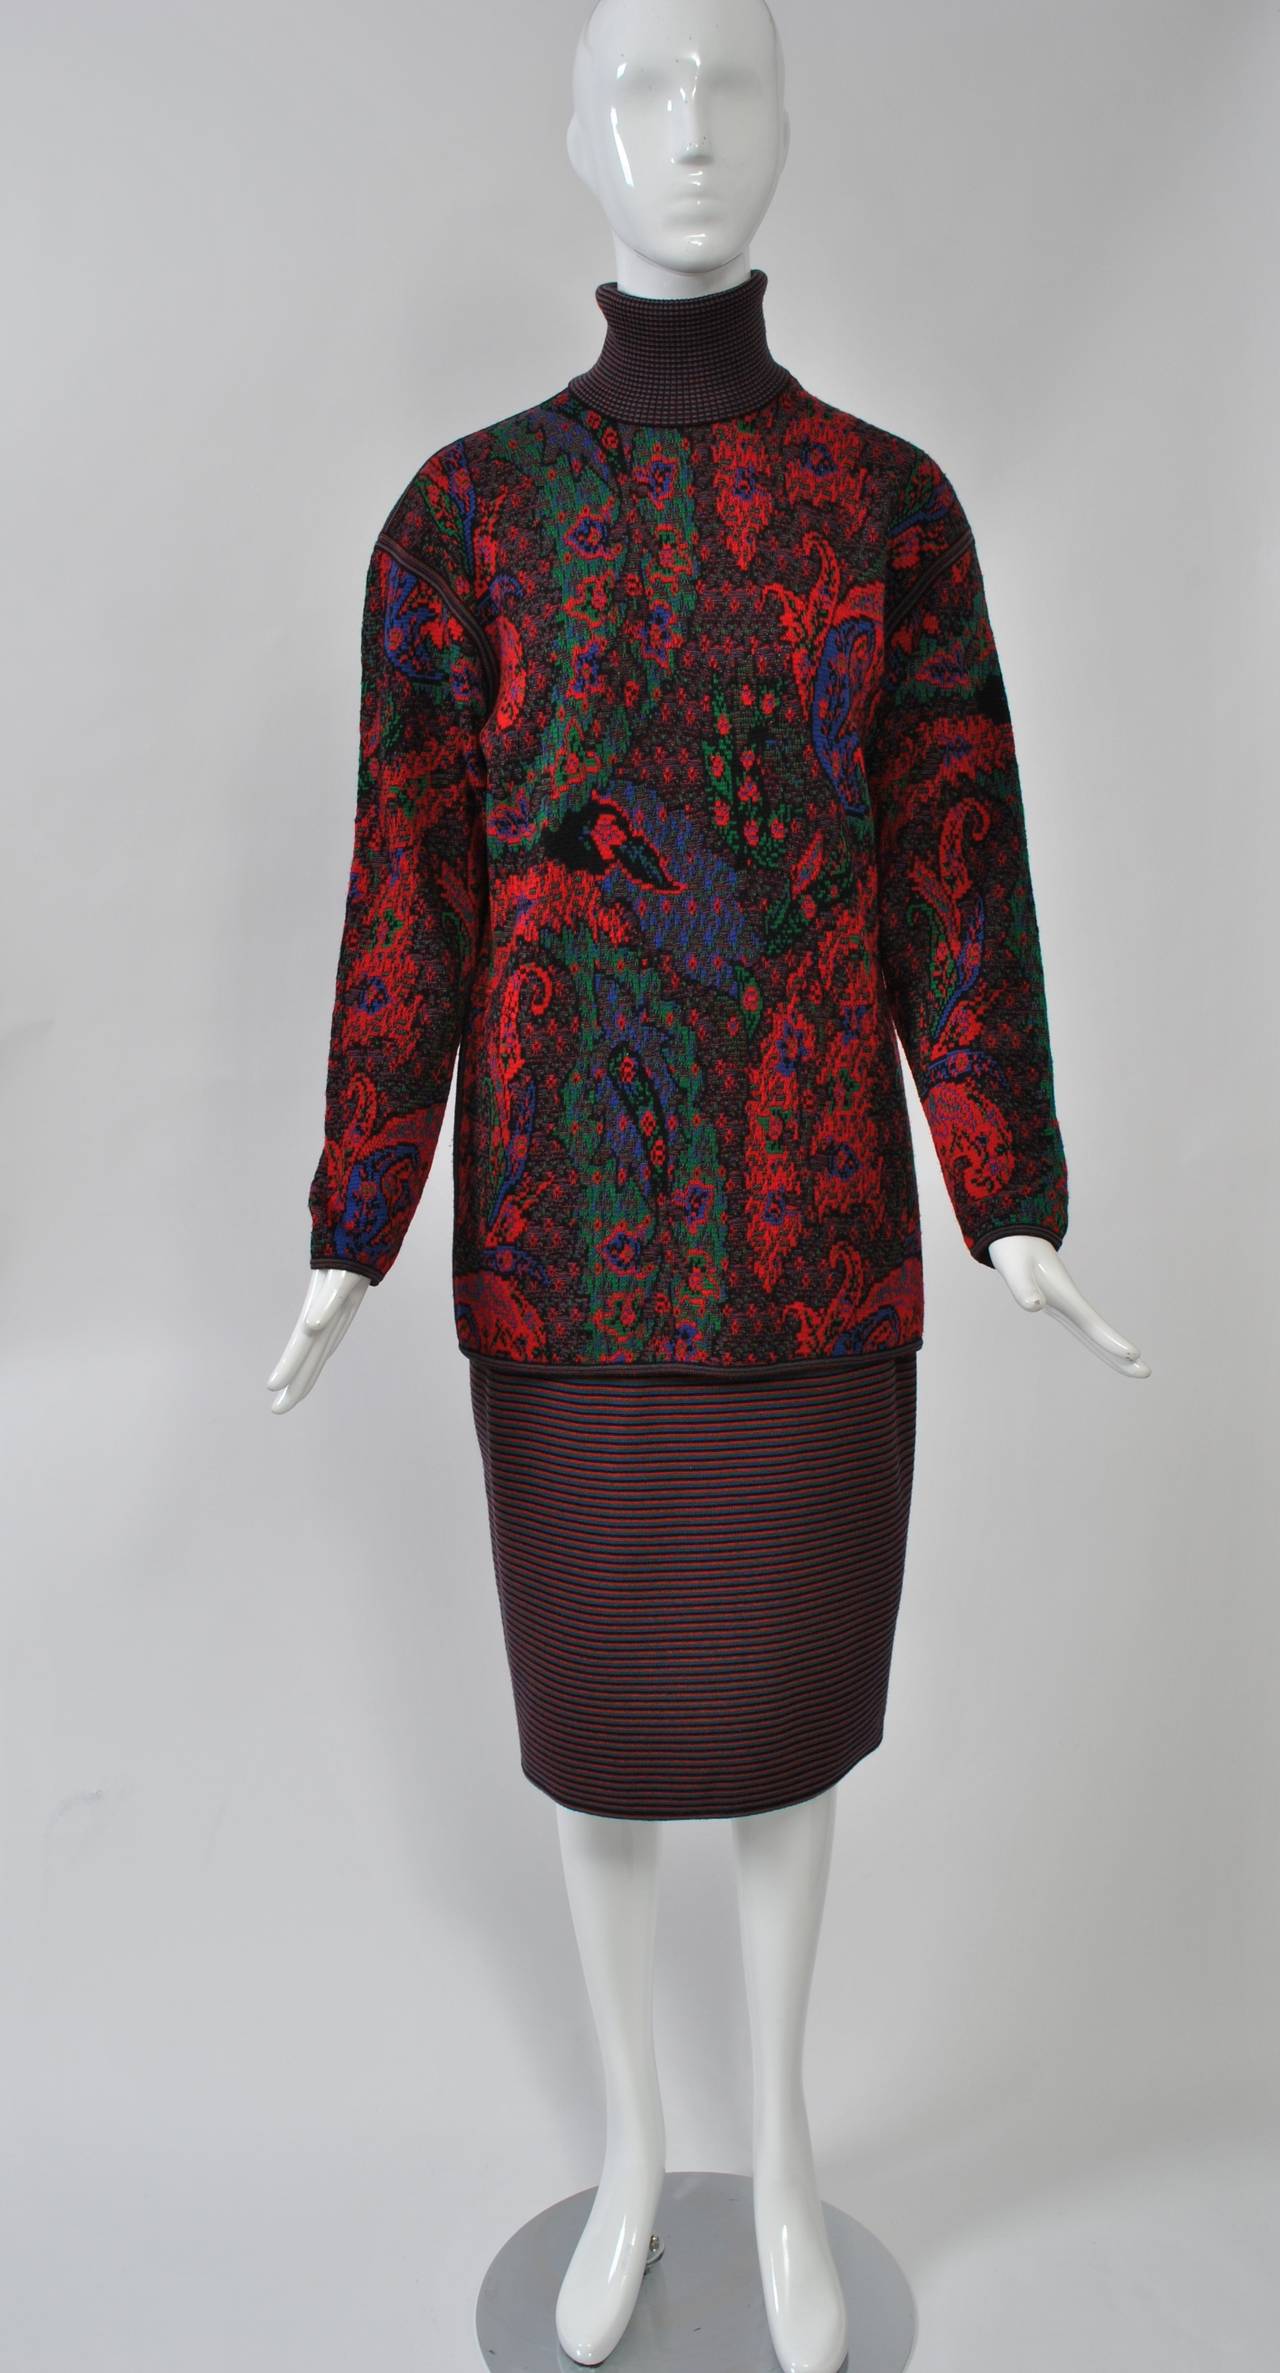 Ungaro two-piece comprising a jacquard wool knit turtleneck in predominantly red and black with blue and green accents over a coordinating striped skirt. The long top has dropped shoulders and is bound with the stripe, which also forms the high